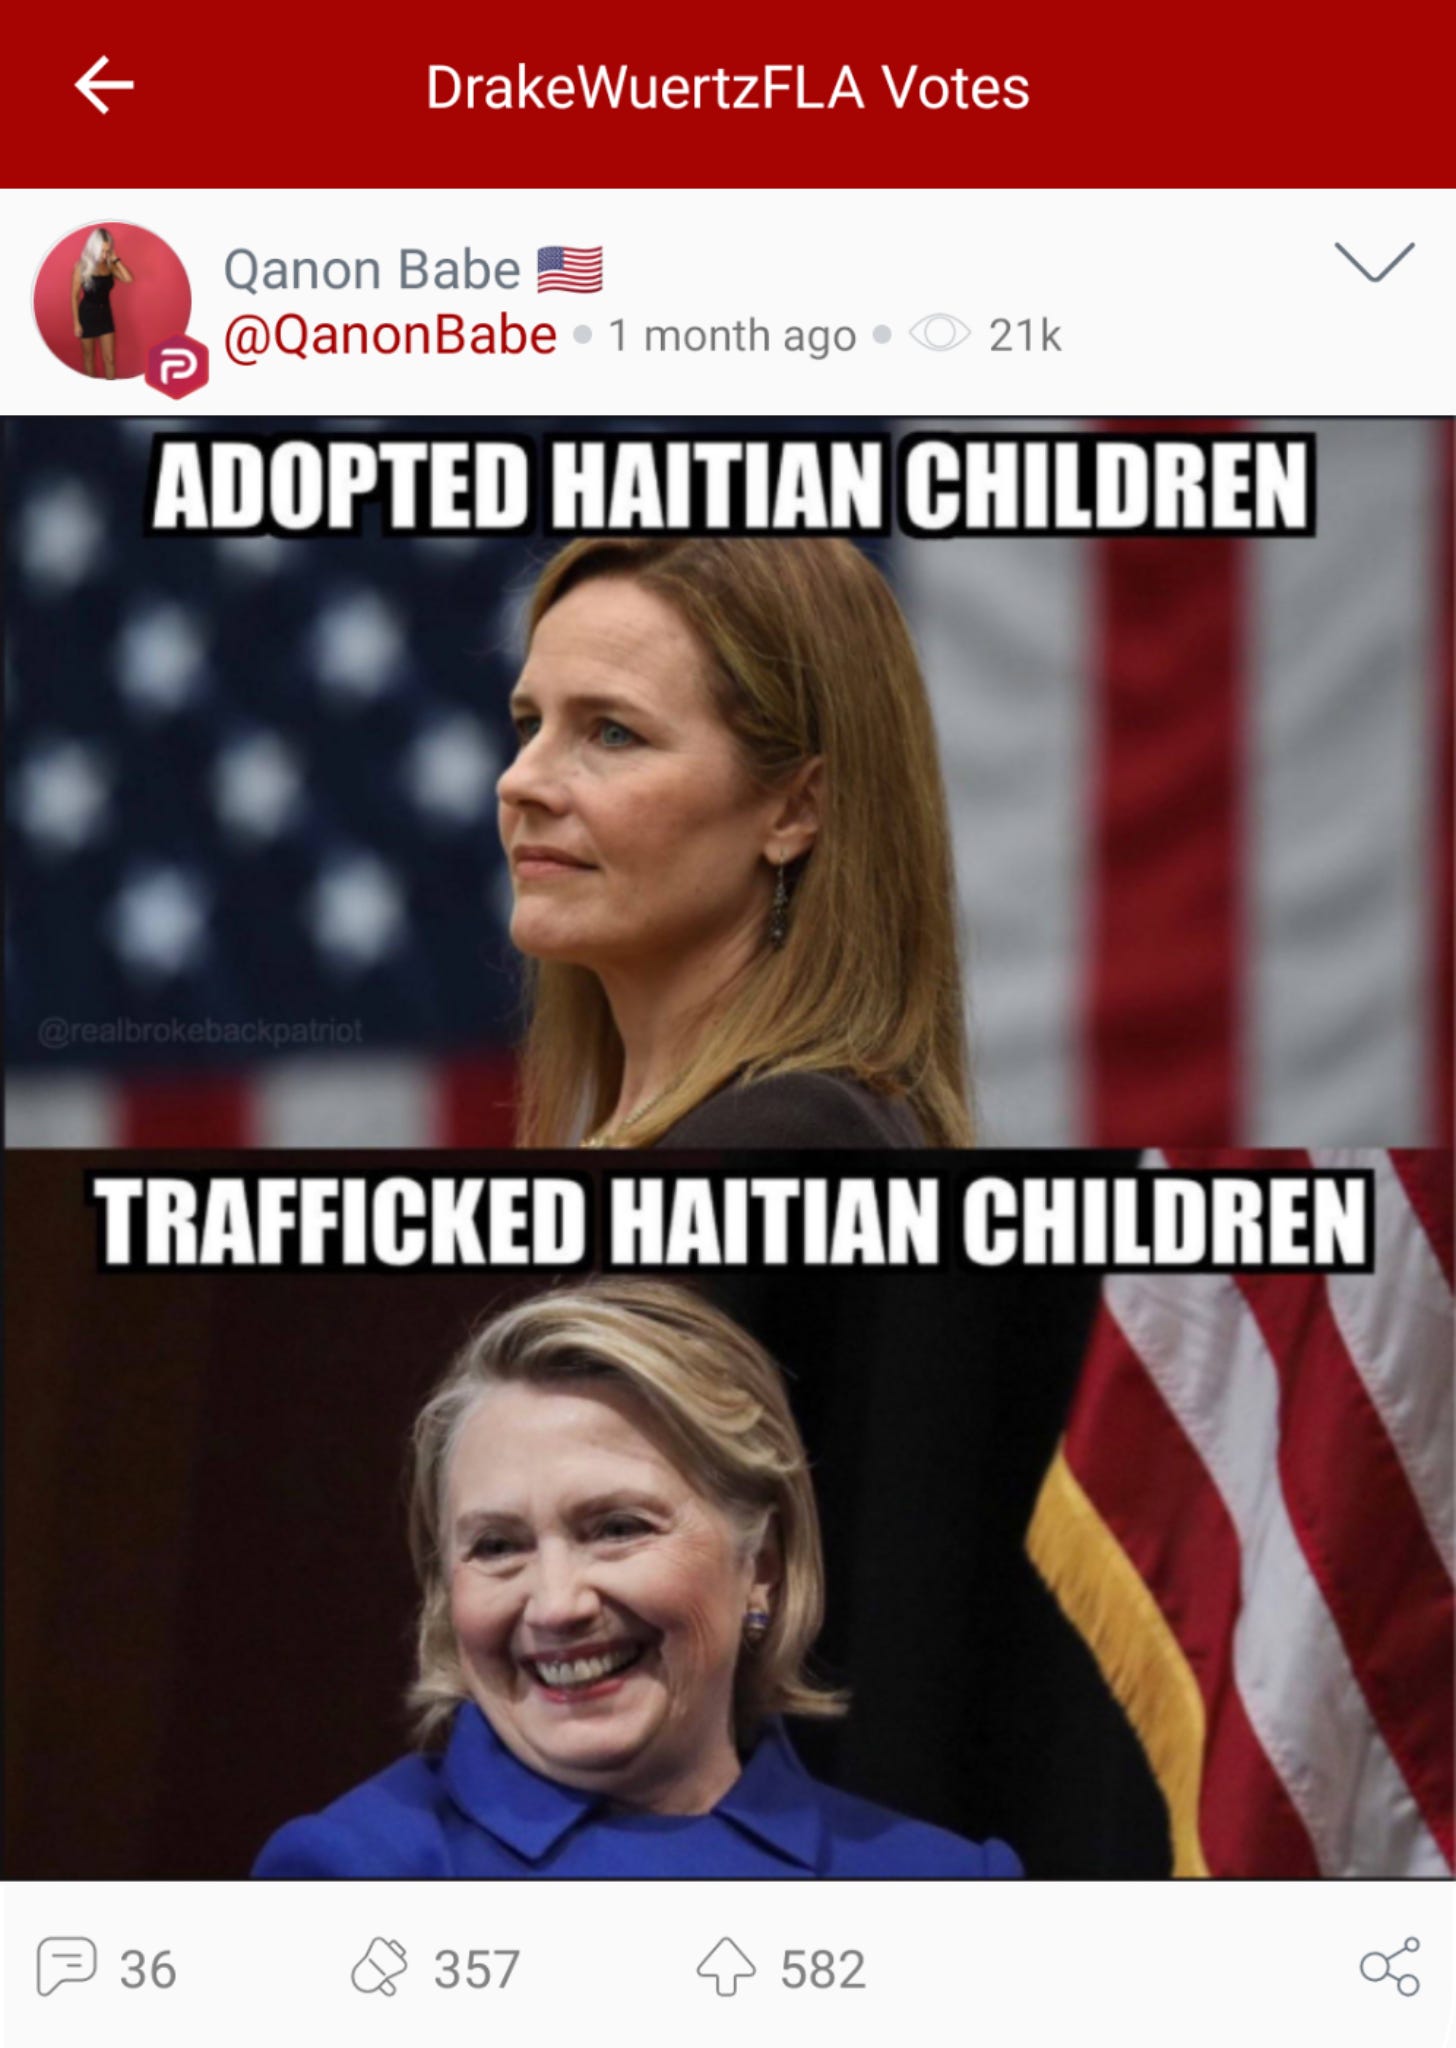 @DrakeWuertzFLA “votes” a Parler post from “QAnon Babe” that boosts the baselss conspiracy theory that alleges Hillary Clinton trafficked children in Haiti. (Image: Parler screenshot.)